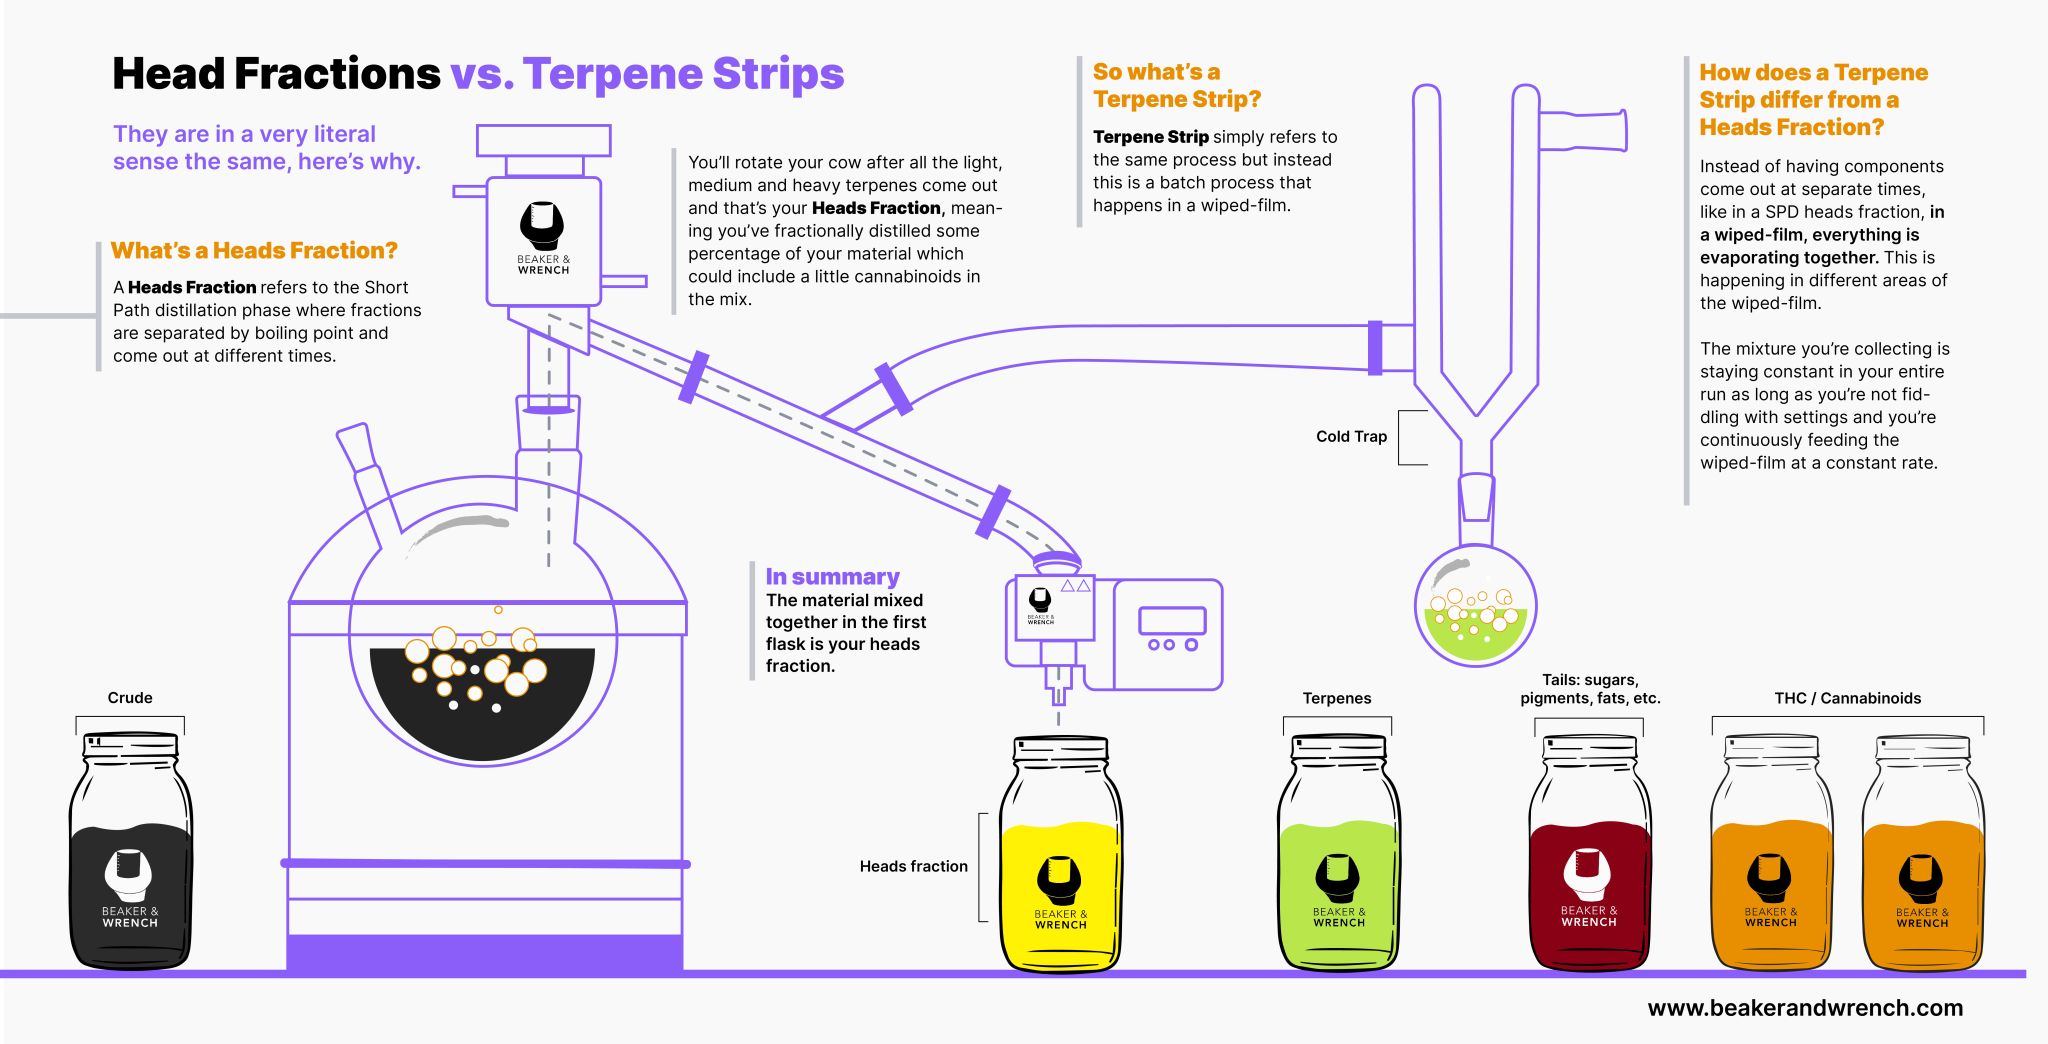 An info-graphic describing the differences and similarities between Terpene Strips and heads Fractions. 